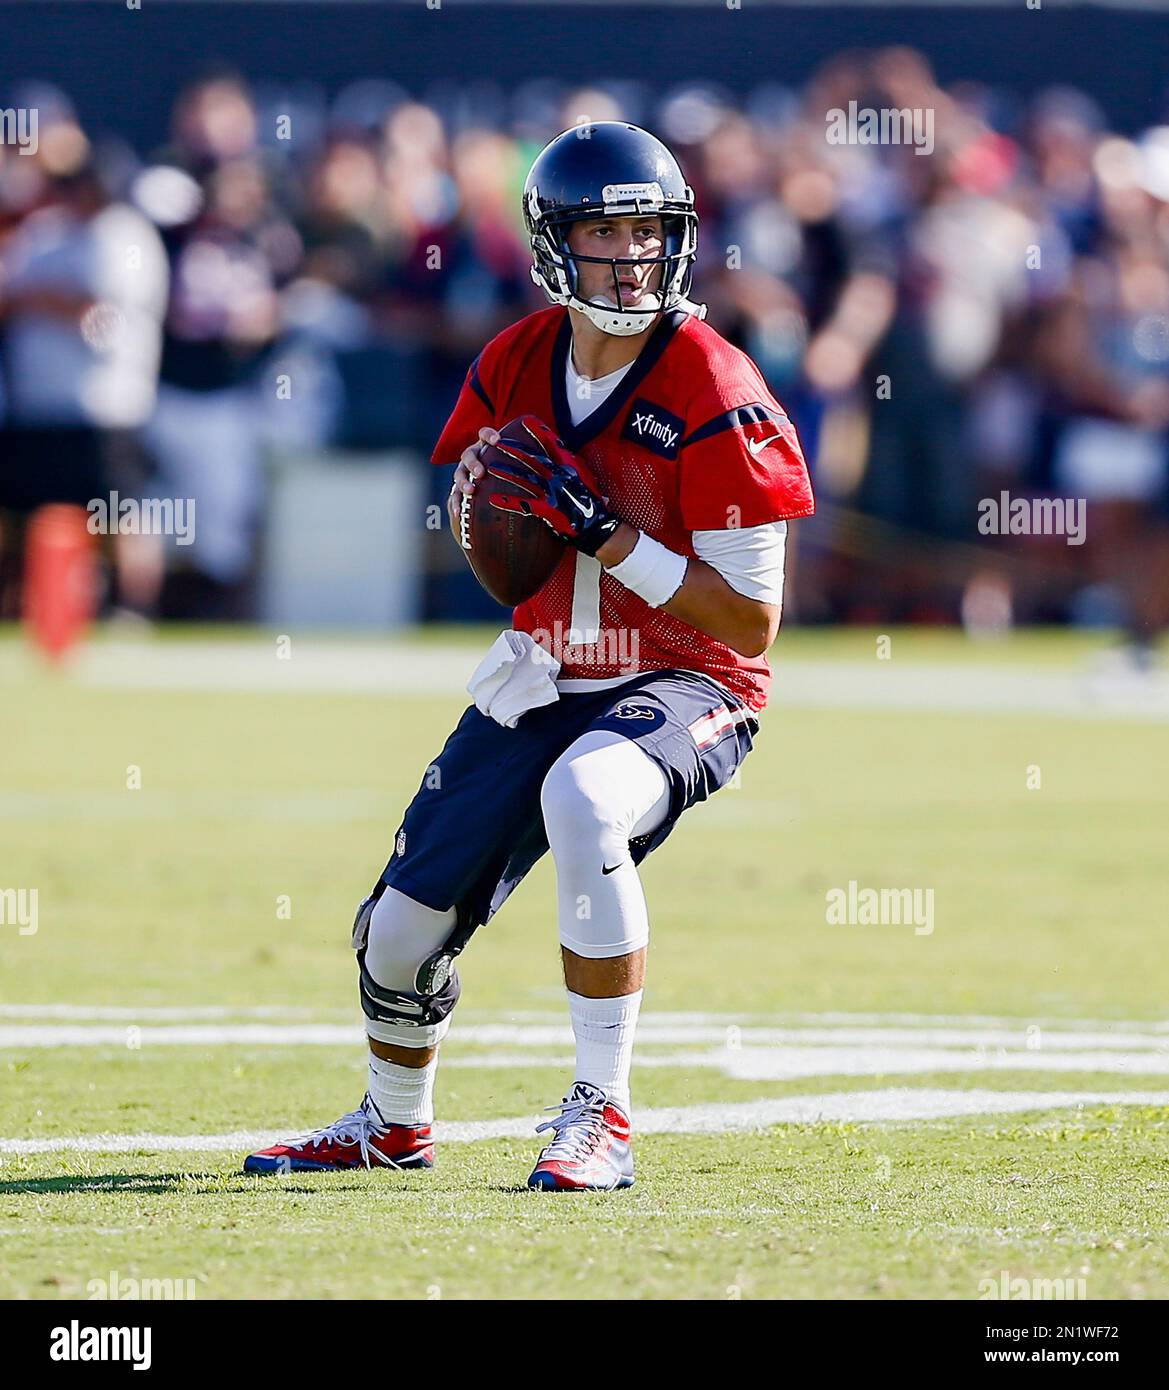 Houston Texans quarterback Brian Hoyer (7) looks to pass downfield during an NFL football training camp at the Methodist Training Center, Saturday, Aug